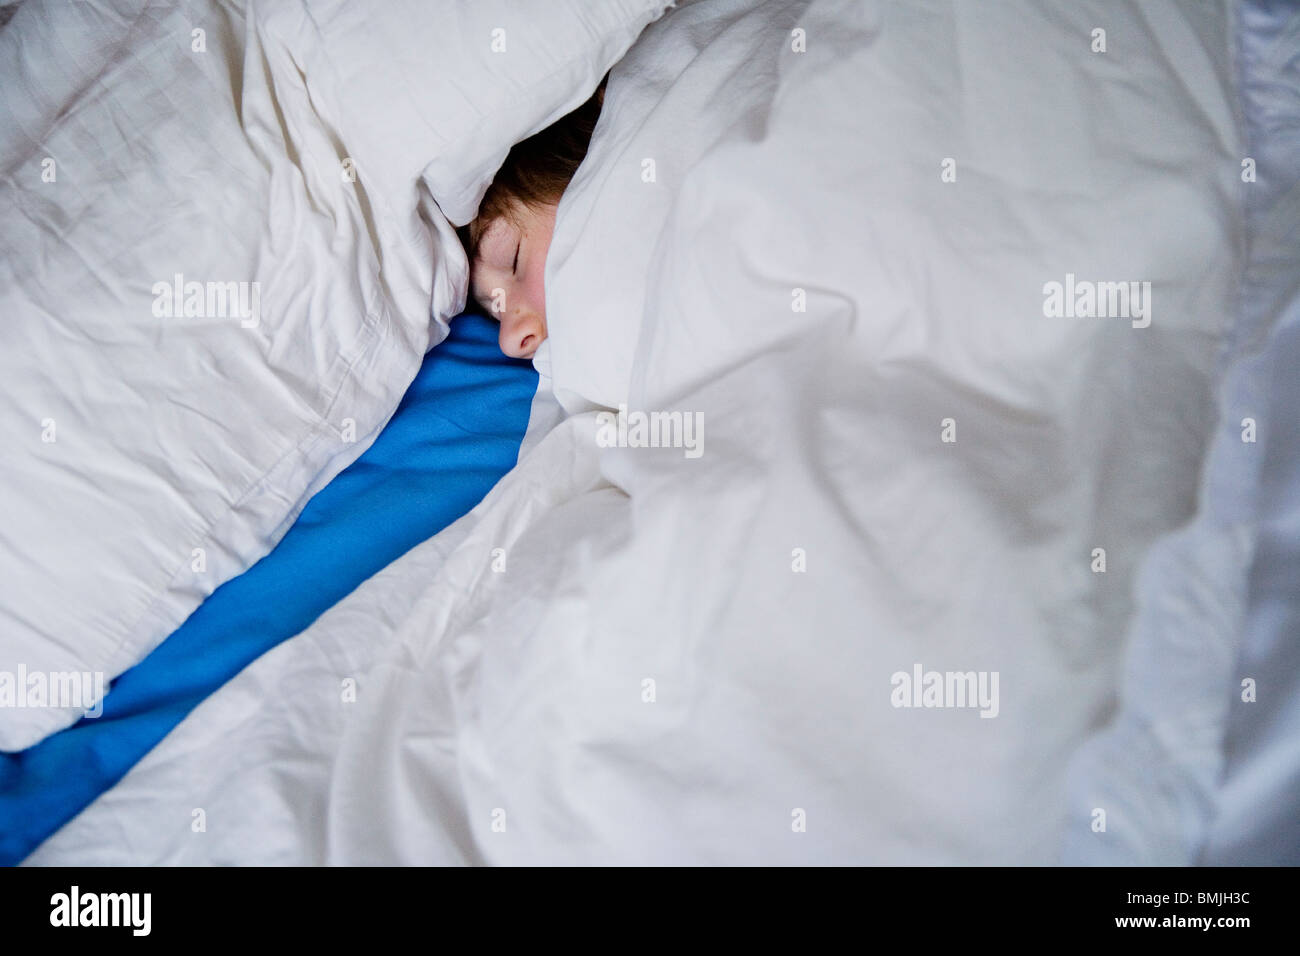 A sleeping boy between white and blue sheets, Sweden. Stock Photo